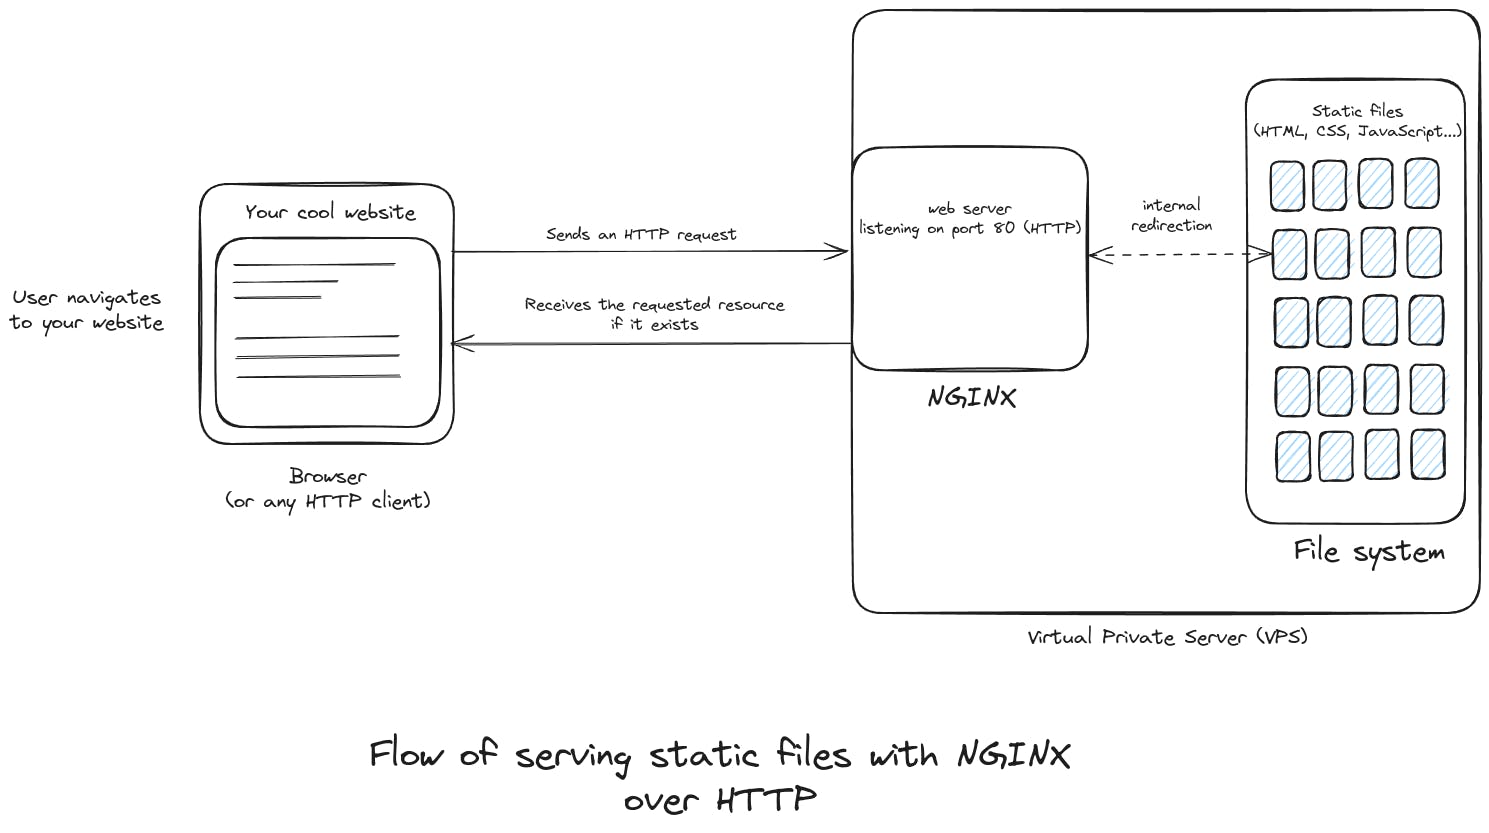 Flow of serving static files with NGINX over HTTP